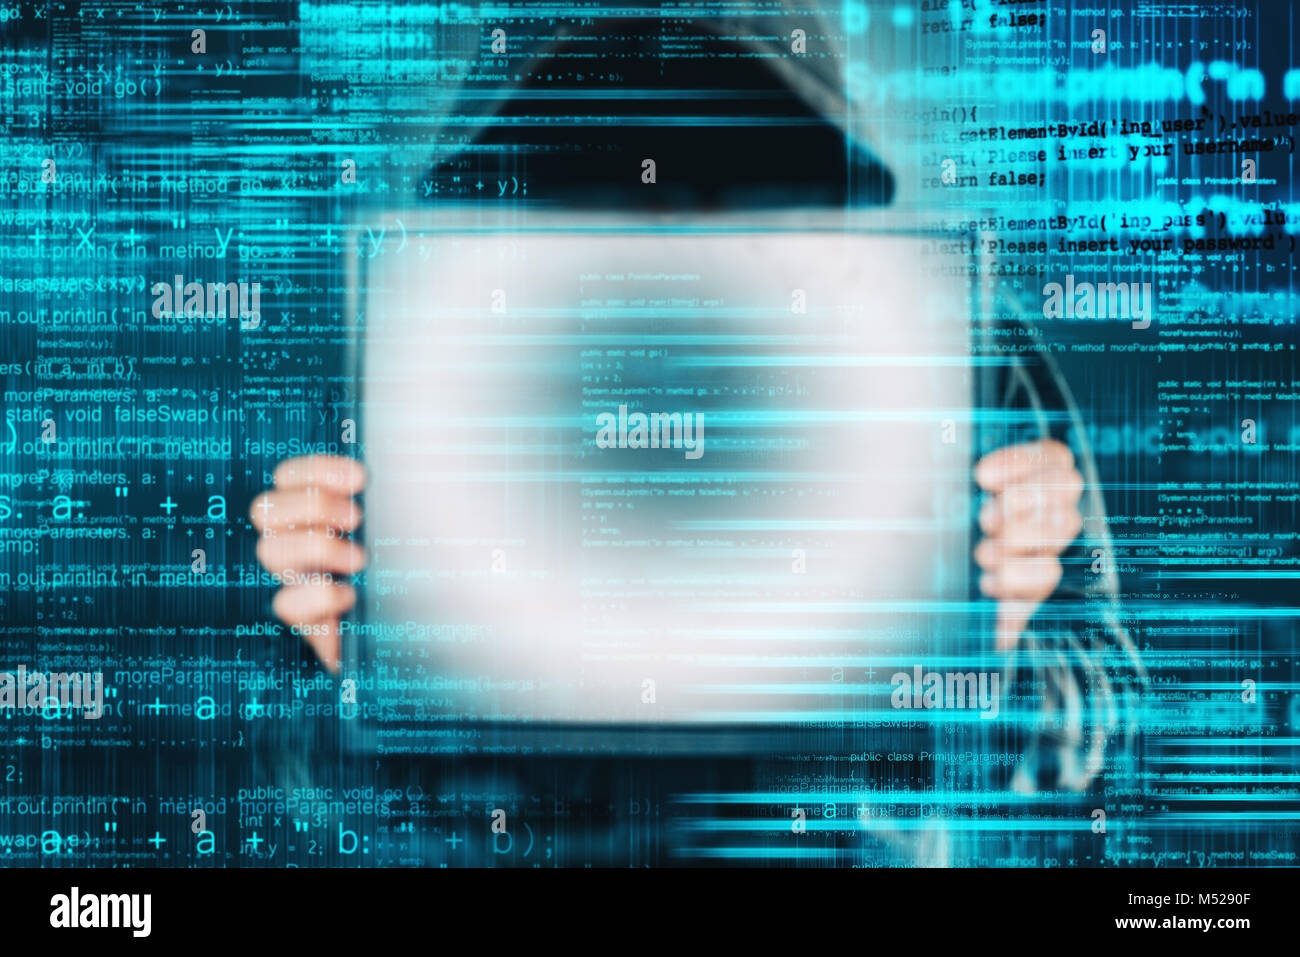 Ransomware computer virus concept, hacker with monitor screen. Internet and cyber security concept Stock Photo